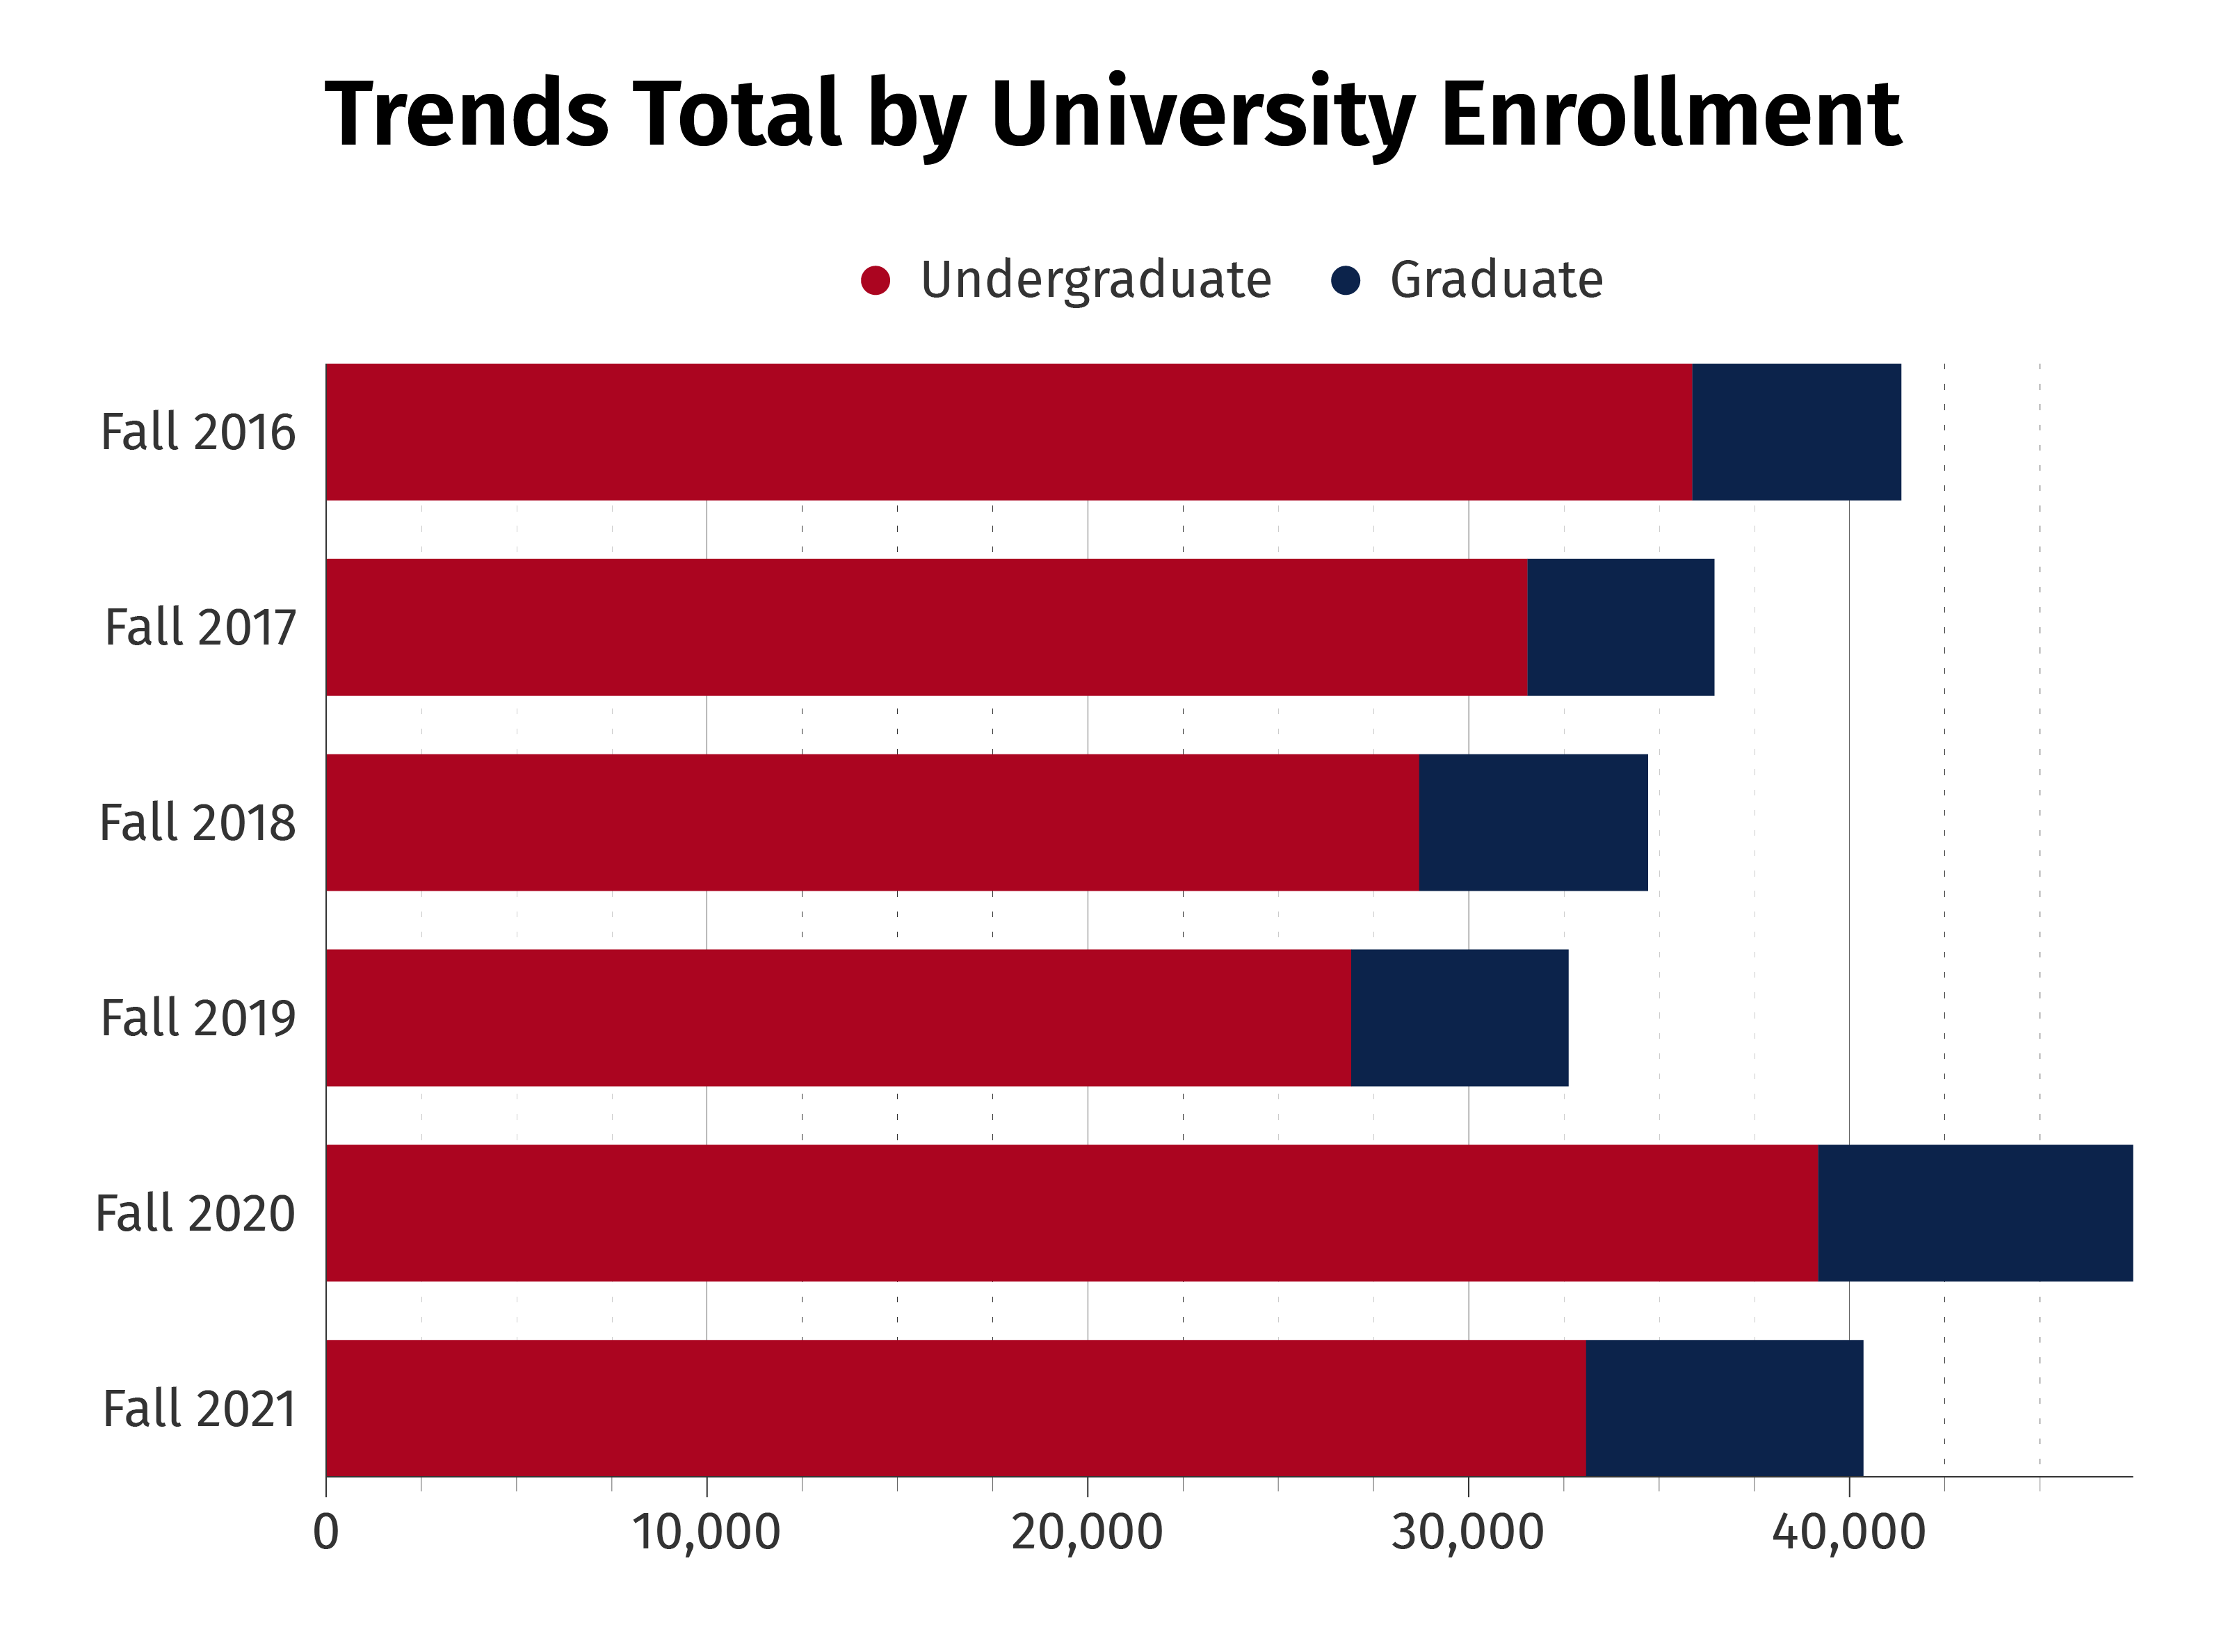 Total Enrollment By Degree Level Chart2